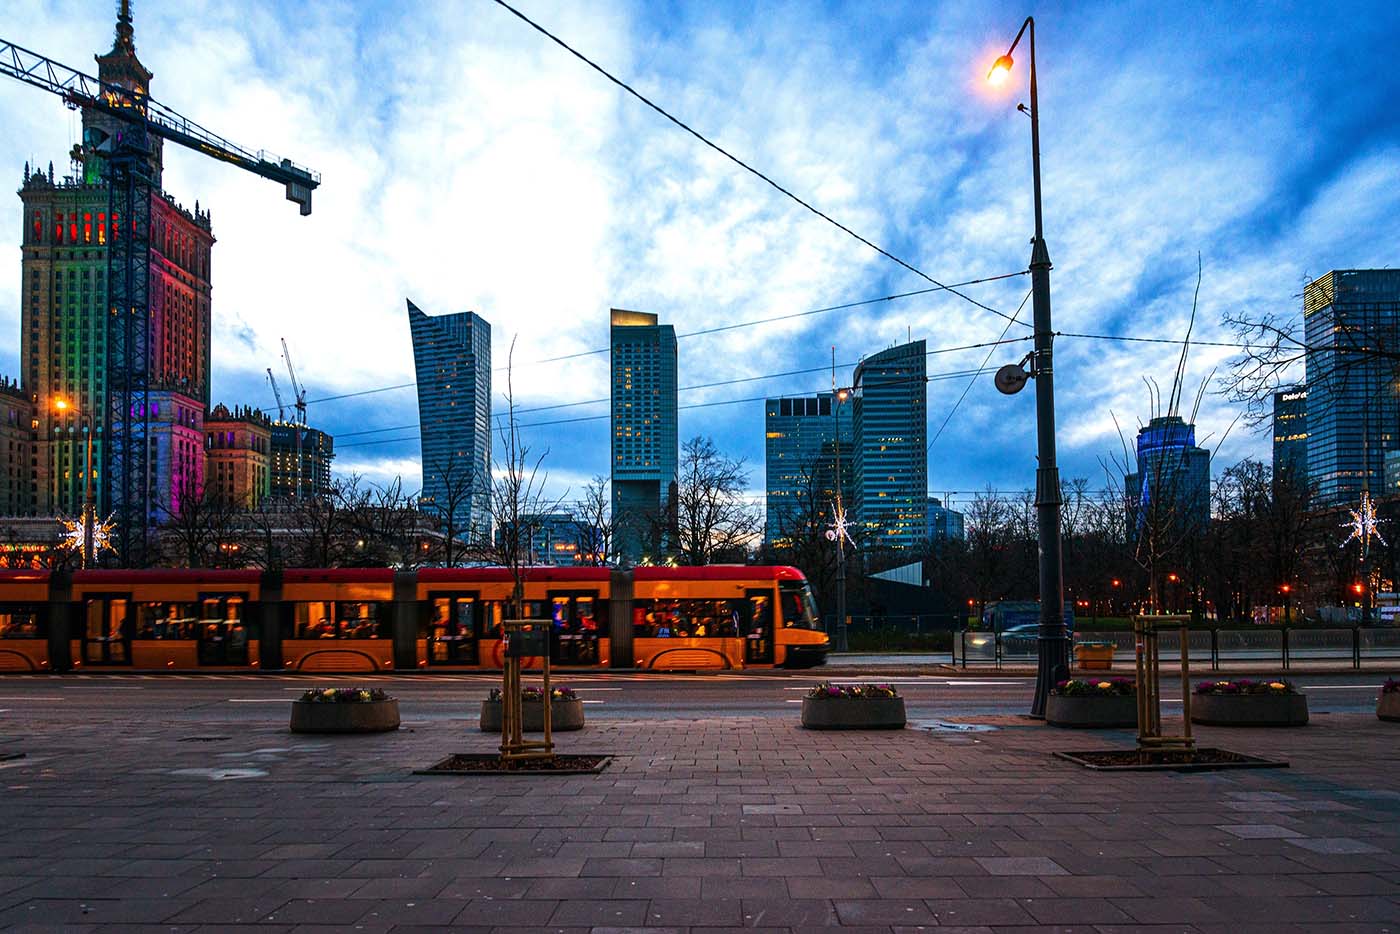 The central streets of Warsaw, Poland